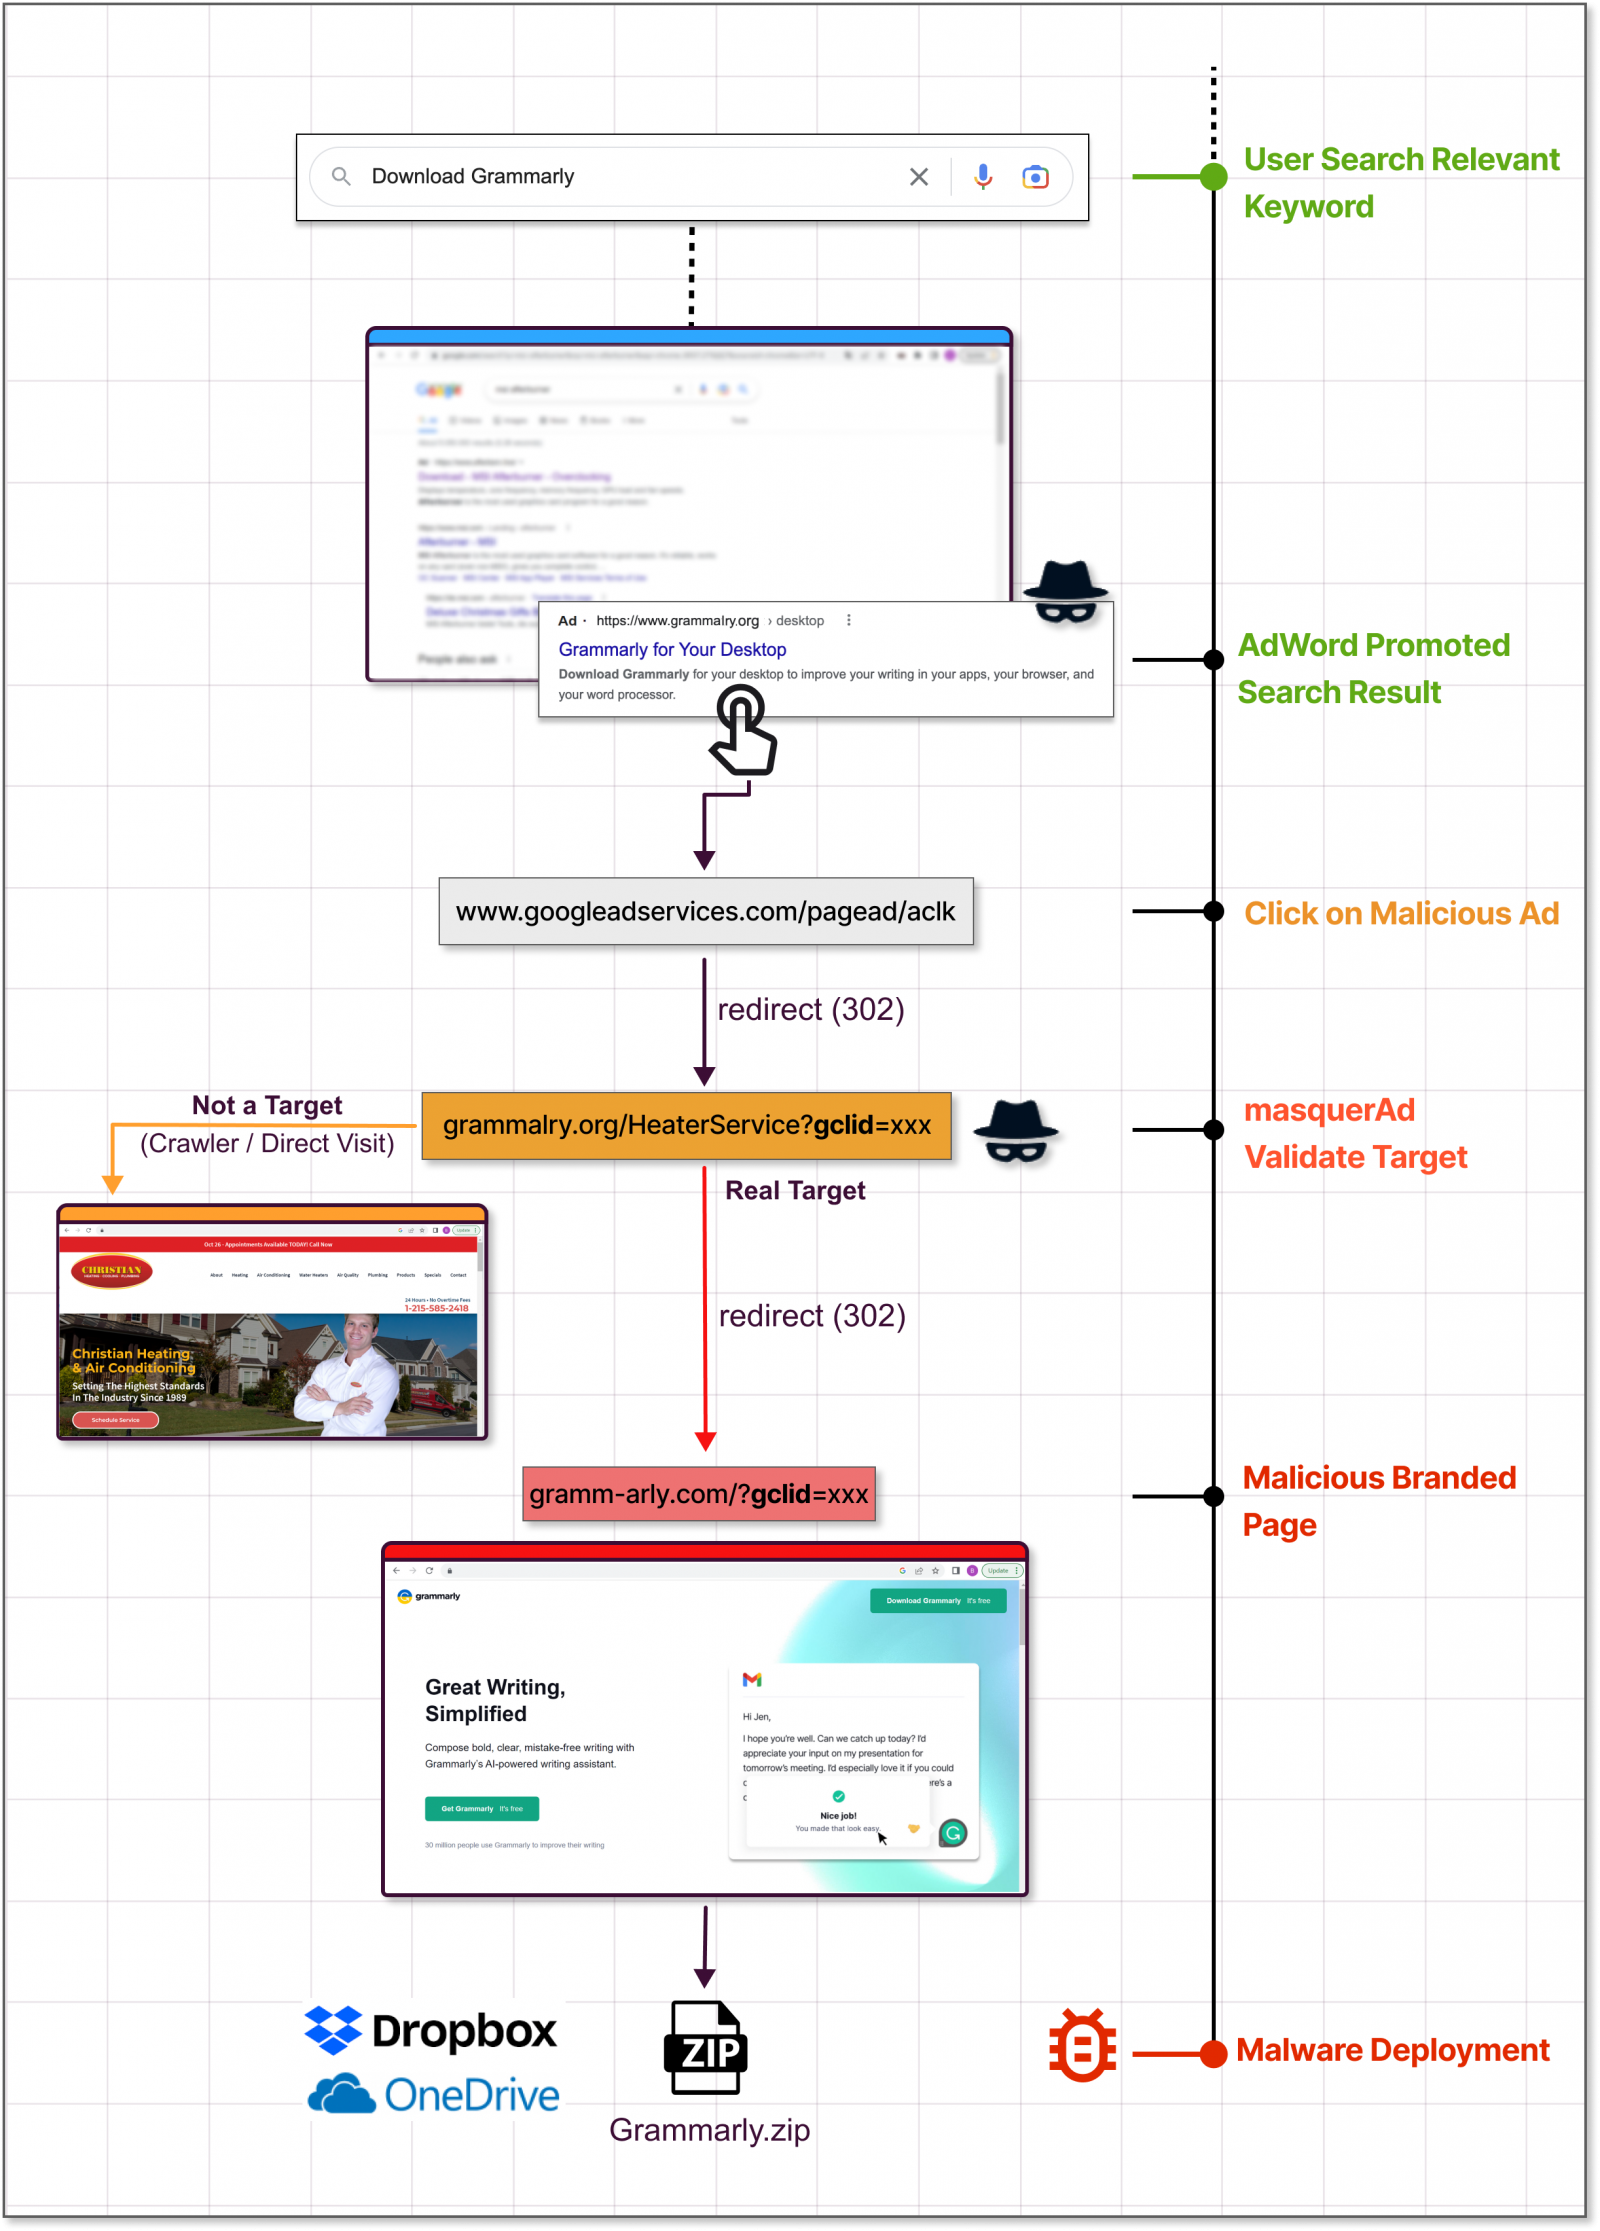 The malware infection flow